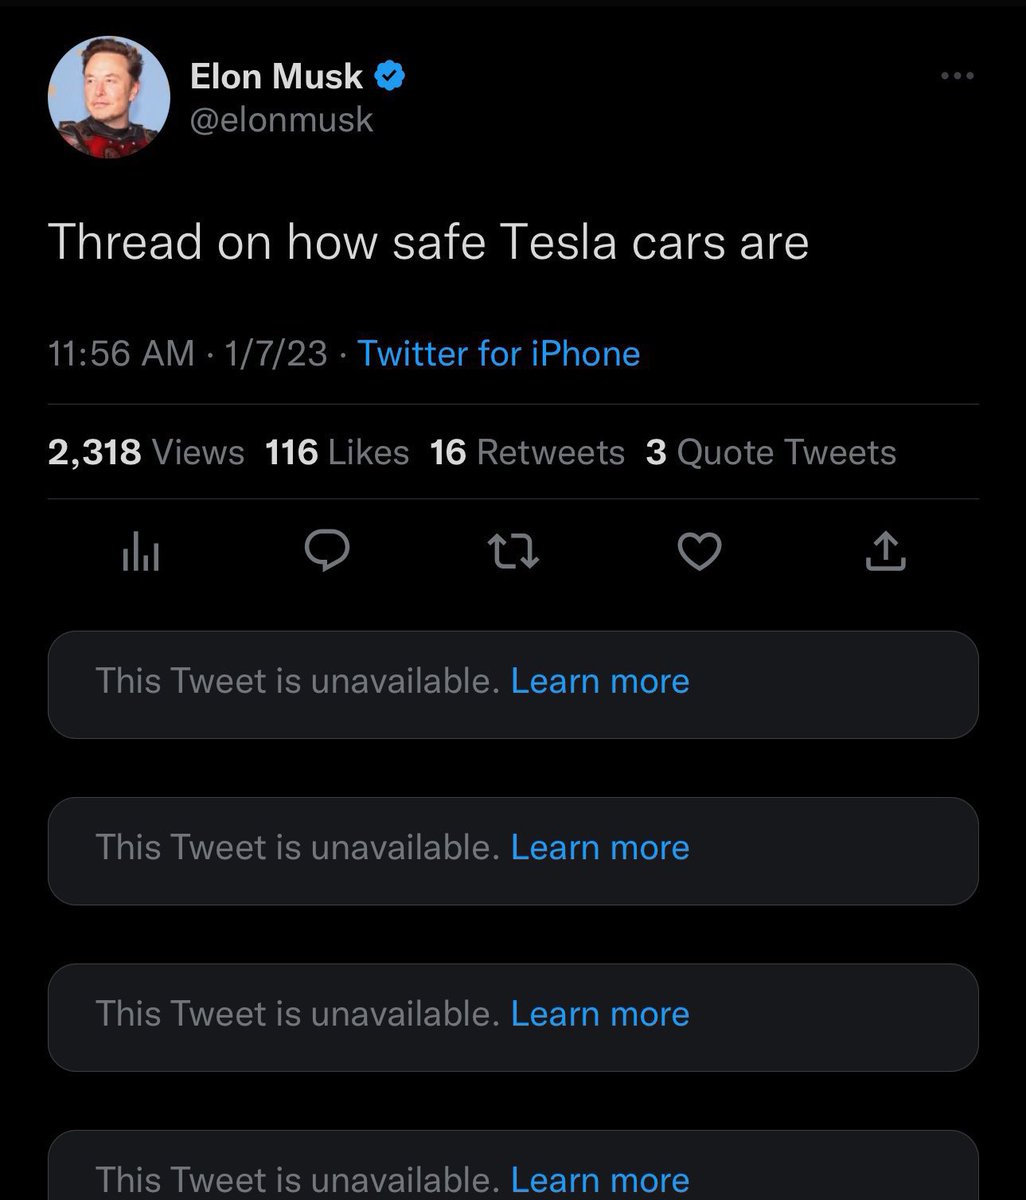 our favorite deleted tweets - elon musk halli - Elon Musk Thread on how safe Tesla cars are 1723 Twitter for iPhone la 2,318 Views 116 16 3 Quote Tweets 27 This Tweet is unavailable. Learn more This Tweet is unavailable. Learn more This Tweet is unavailab